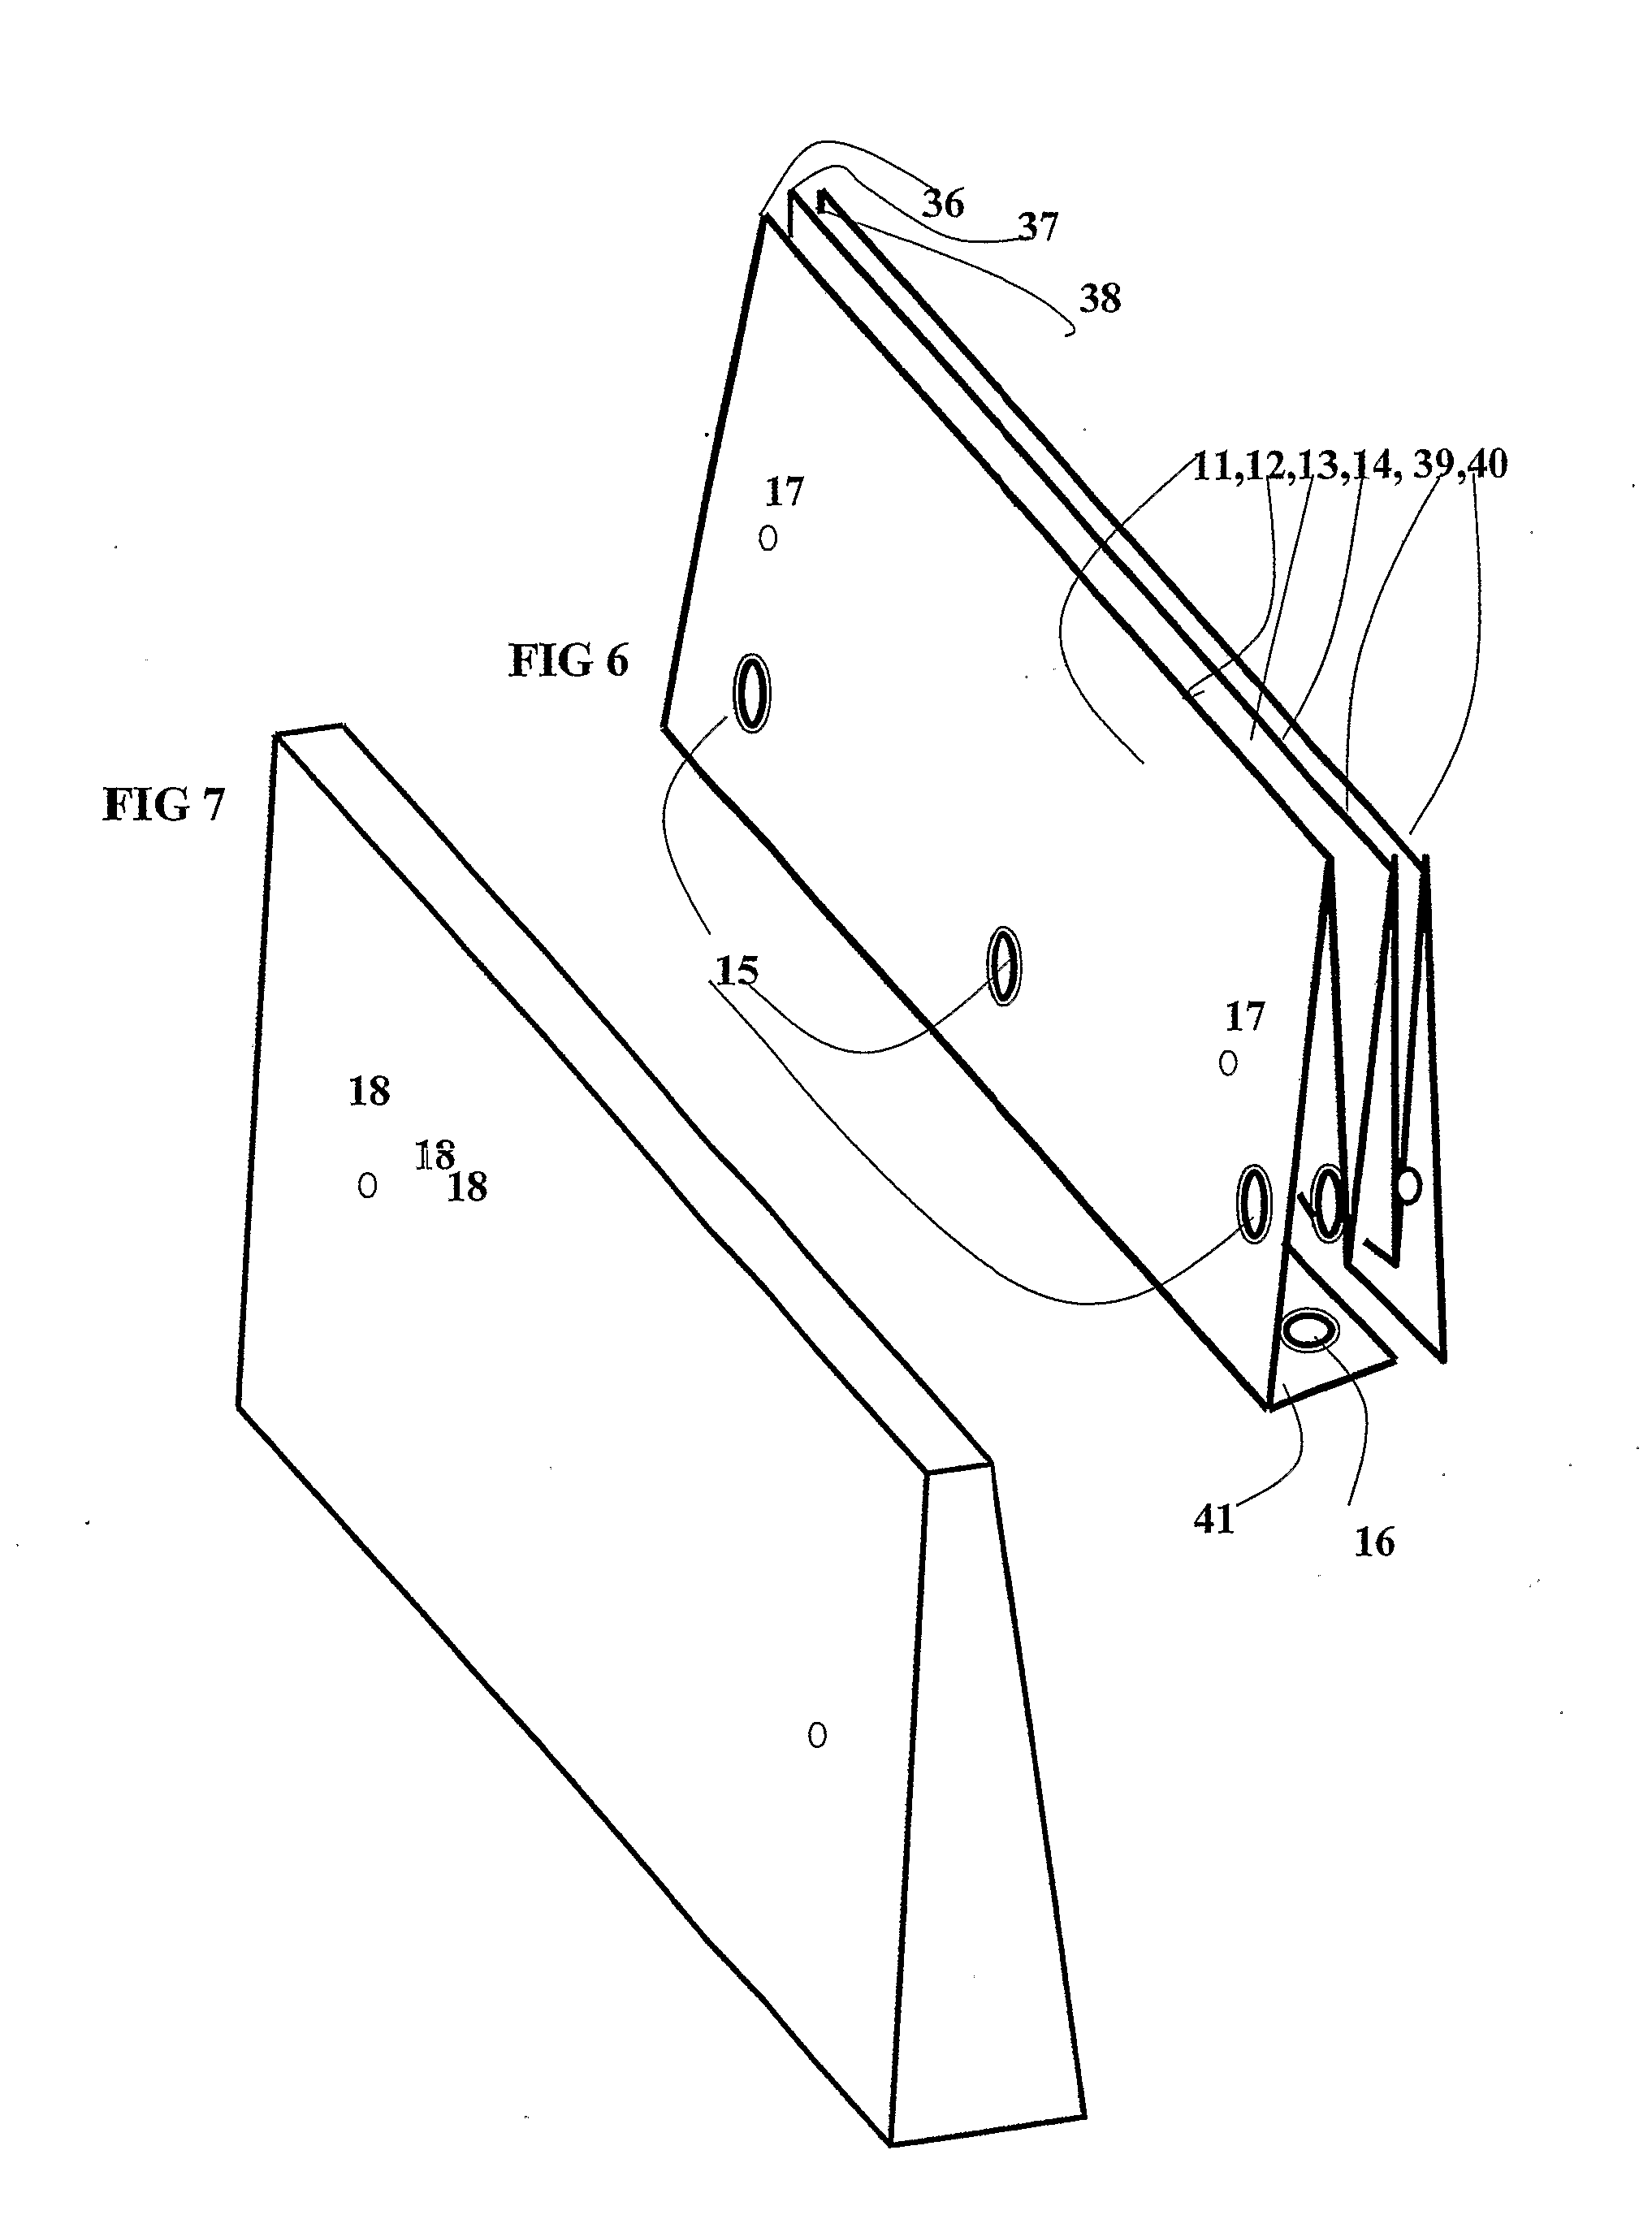 Assemblies and method for securing surface mounted articles to accommodate applied loads